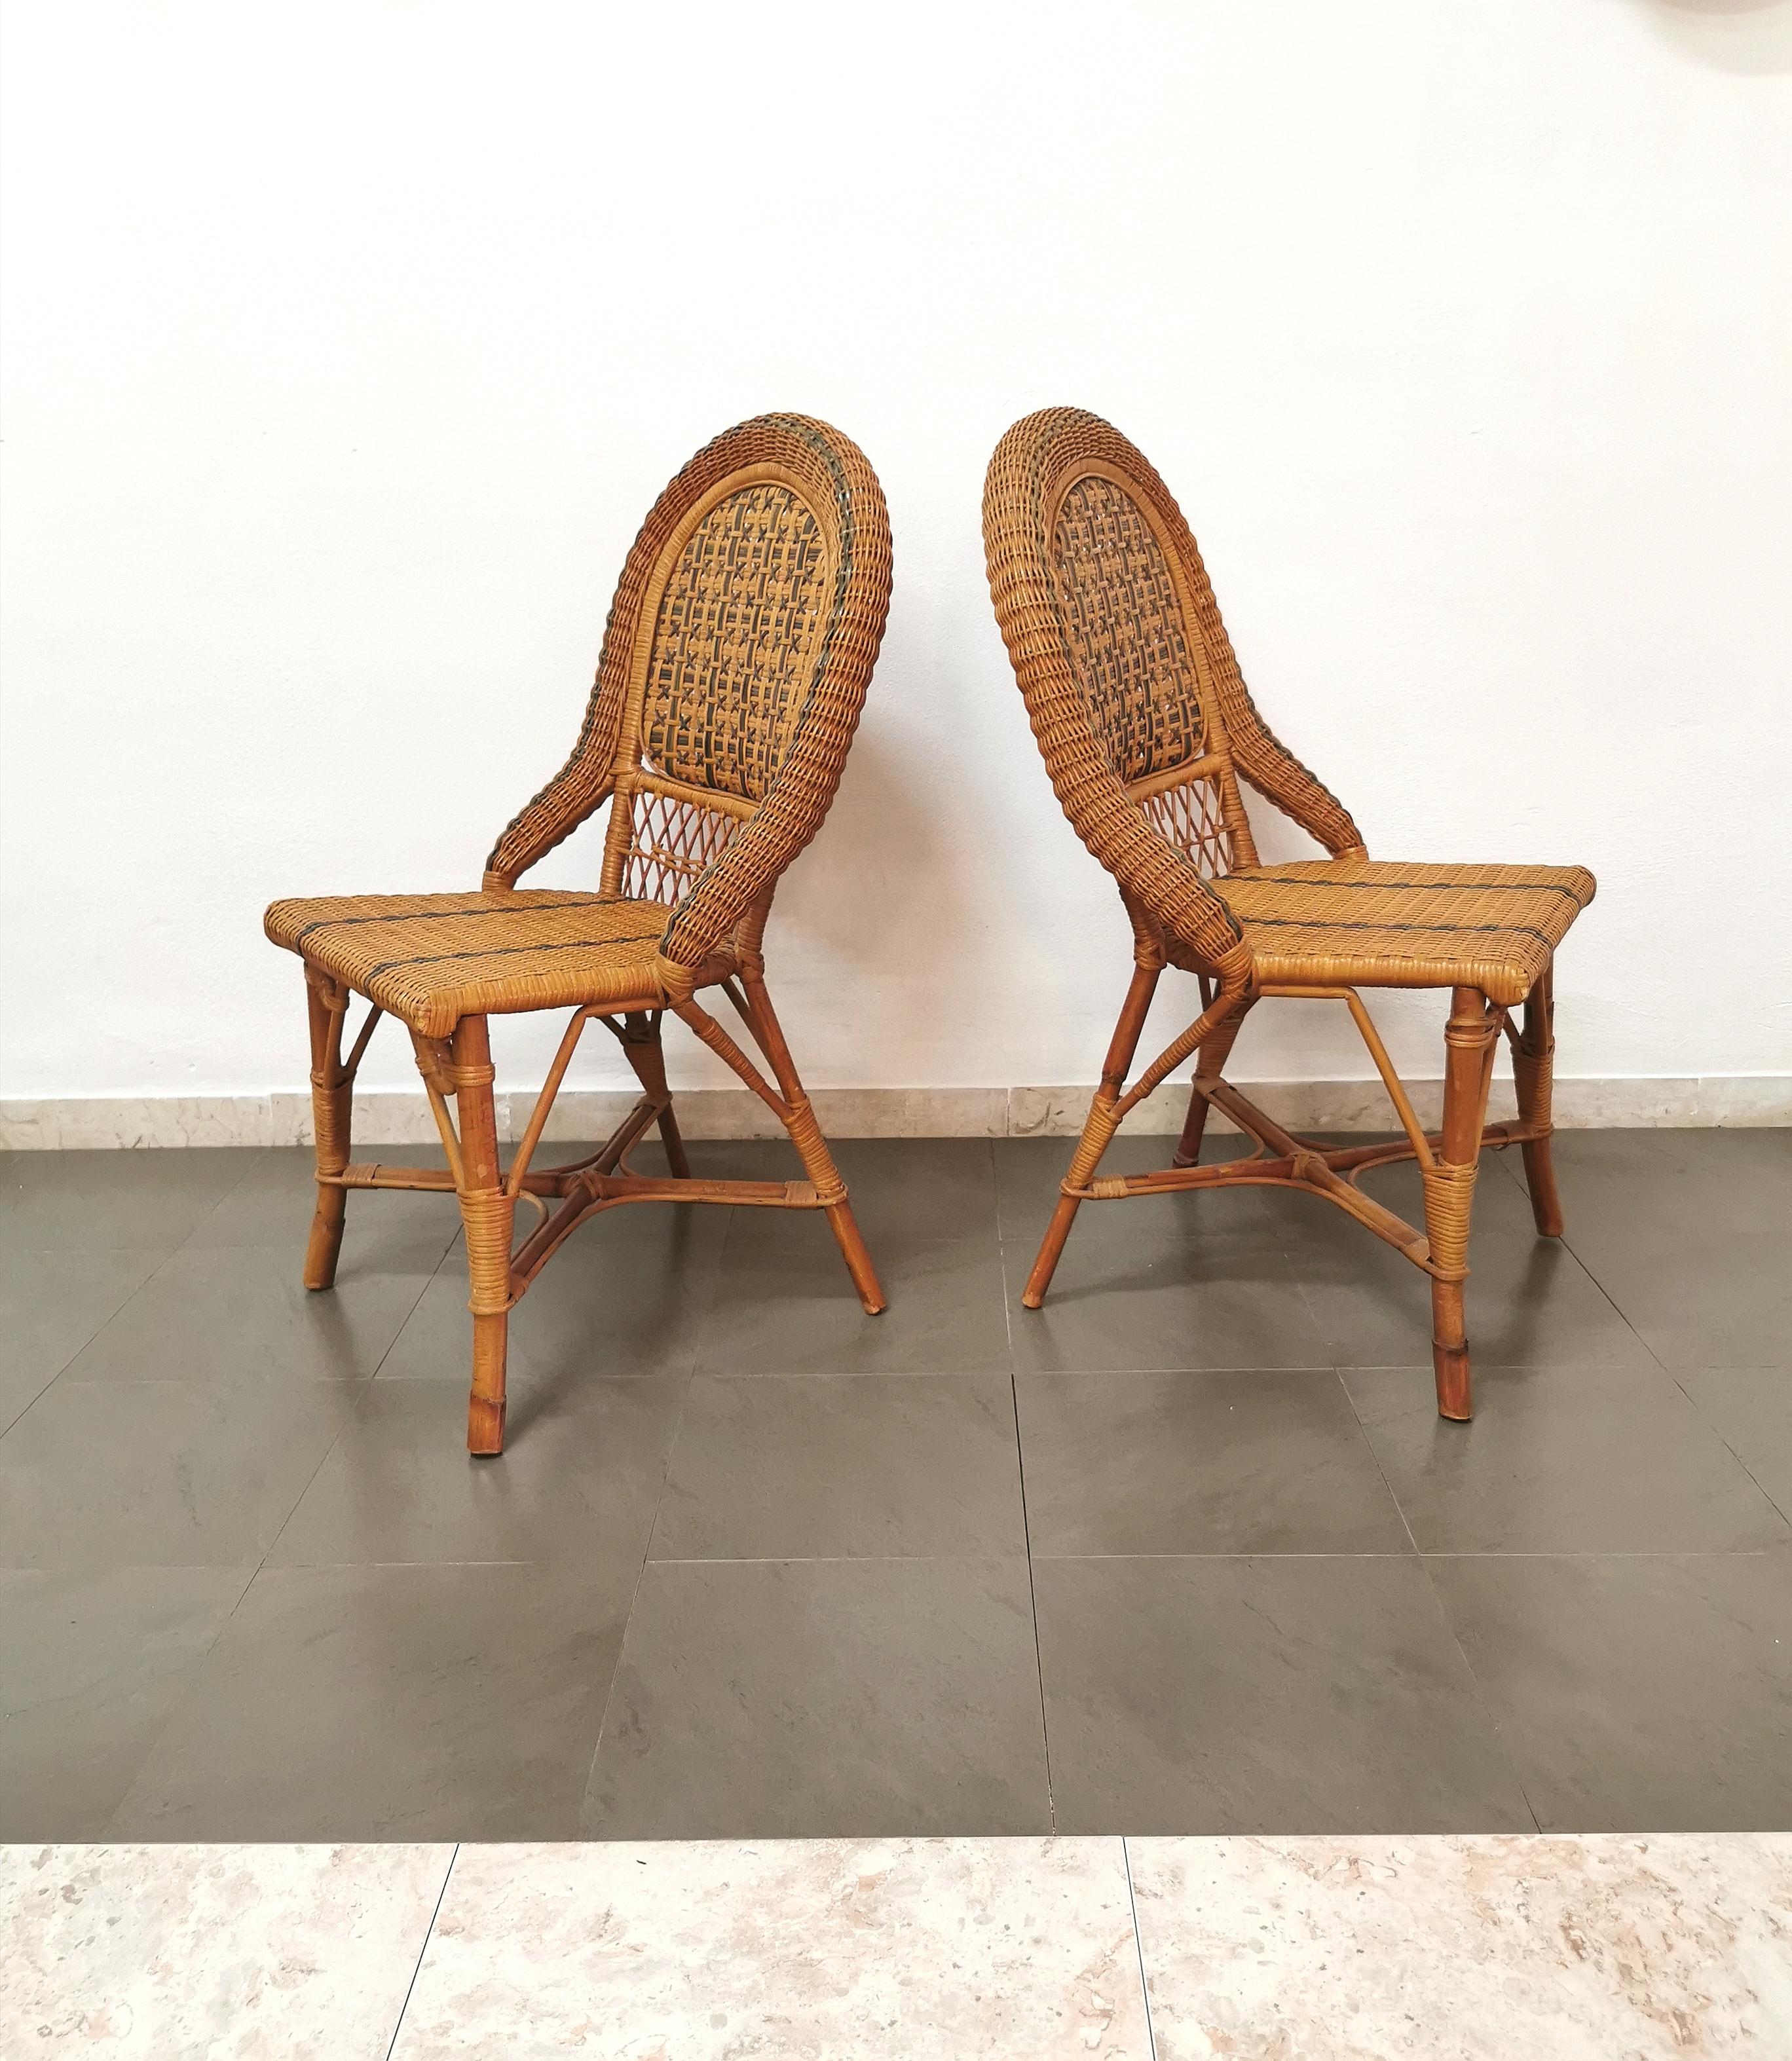 Dining Room Chairs Rattan Bamboo Vivai del Sud Midcentury Italy 1980s Set of 4 1